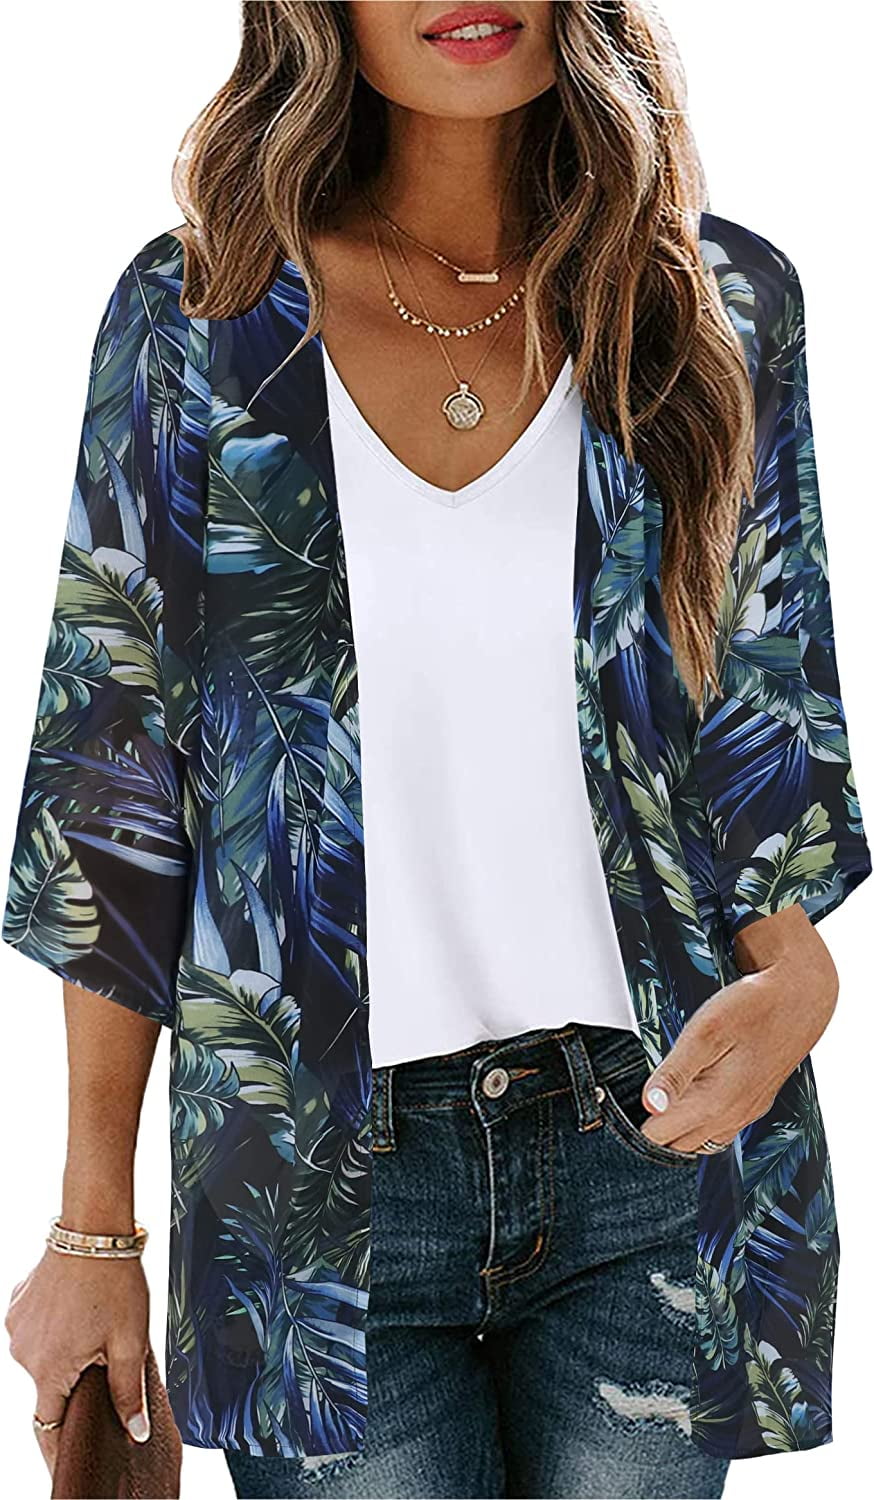 Women's Floral Print Sleeve Kimono Cardigan Loose Cover Up Casual